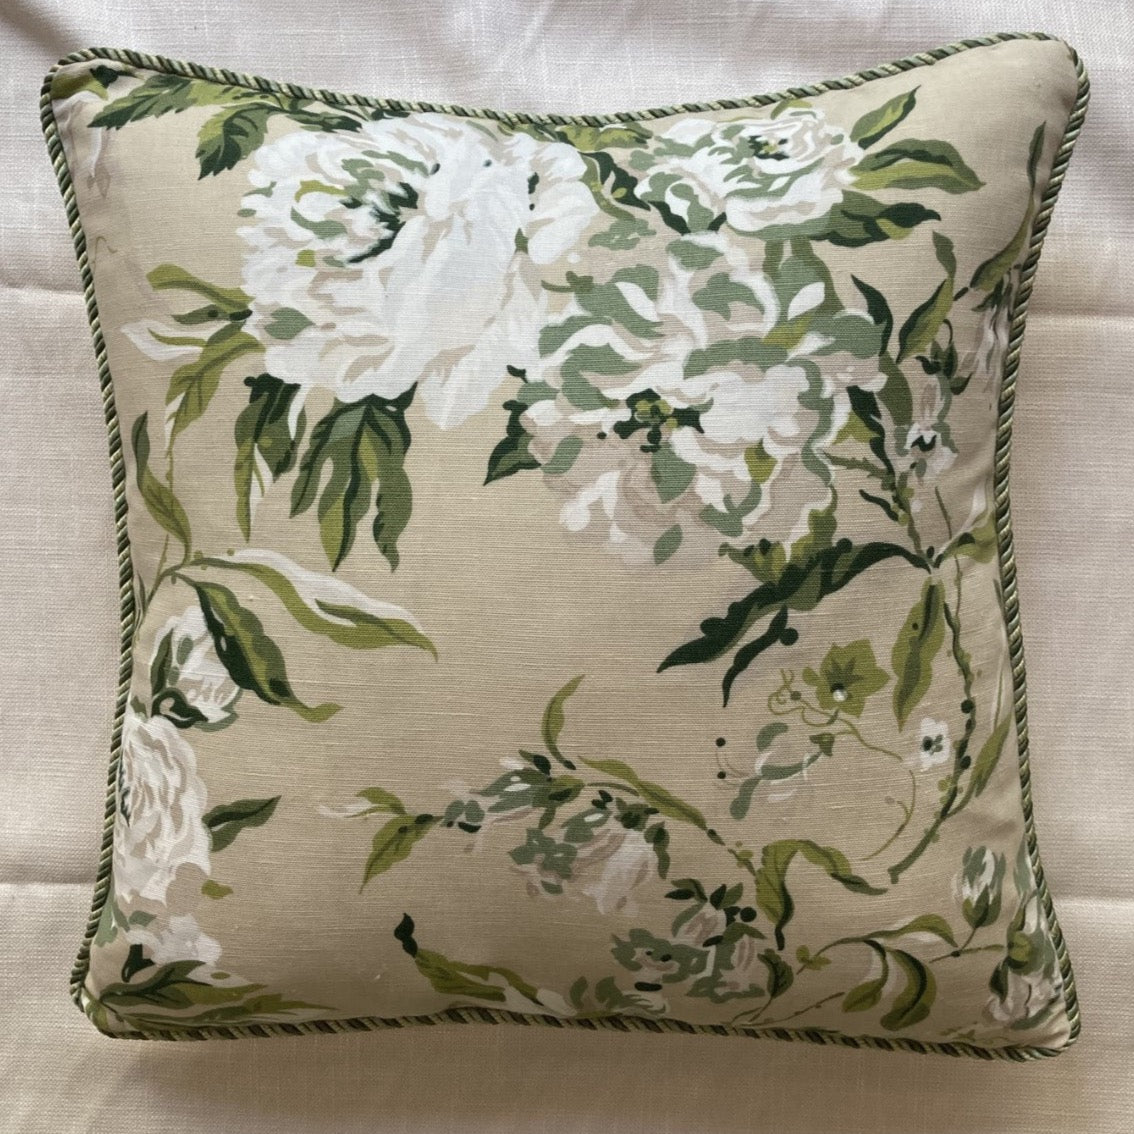 Wrentham Peonies 20 x 20 Square Decorative Designer Pillow with Down Feather Insert